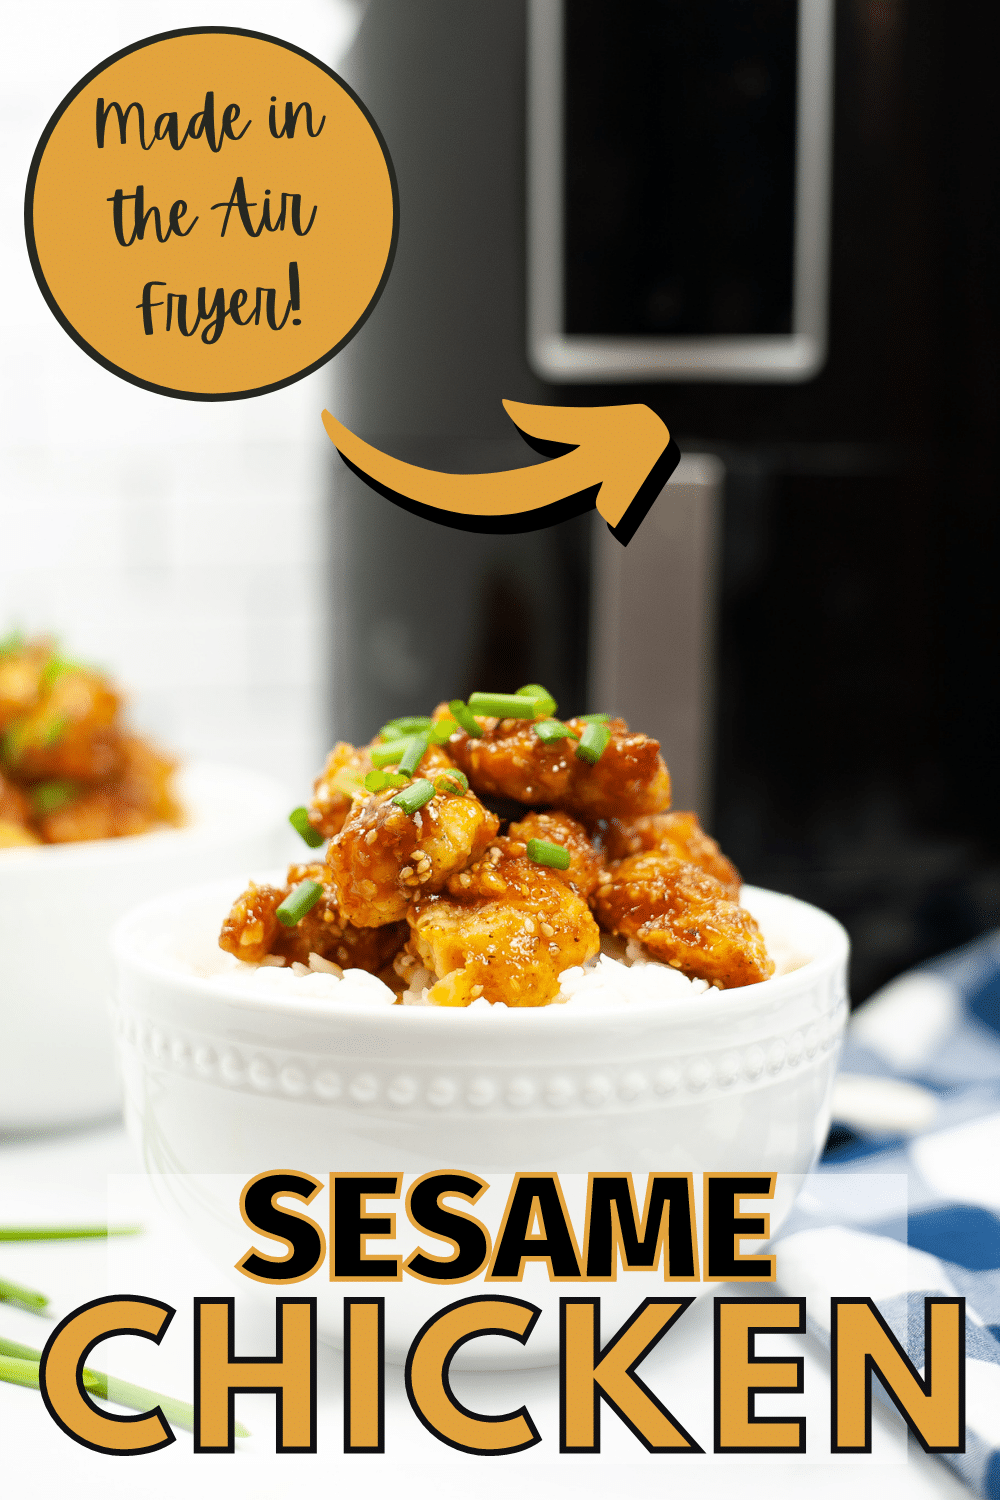 Air Fryer Sesame Chicken is so easy to make, you can whip up a batch any night of the week. It’s also much healthier than getting takeout. #airfryer #sesamechicken #dinner #recipe #chicken via @wondermomwannab